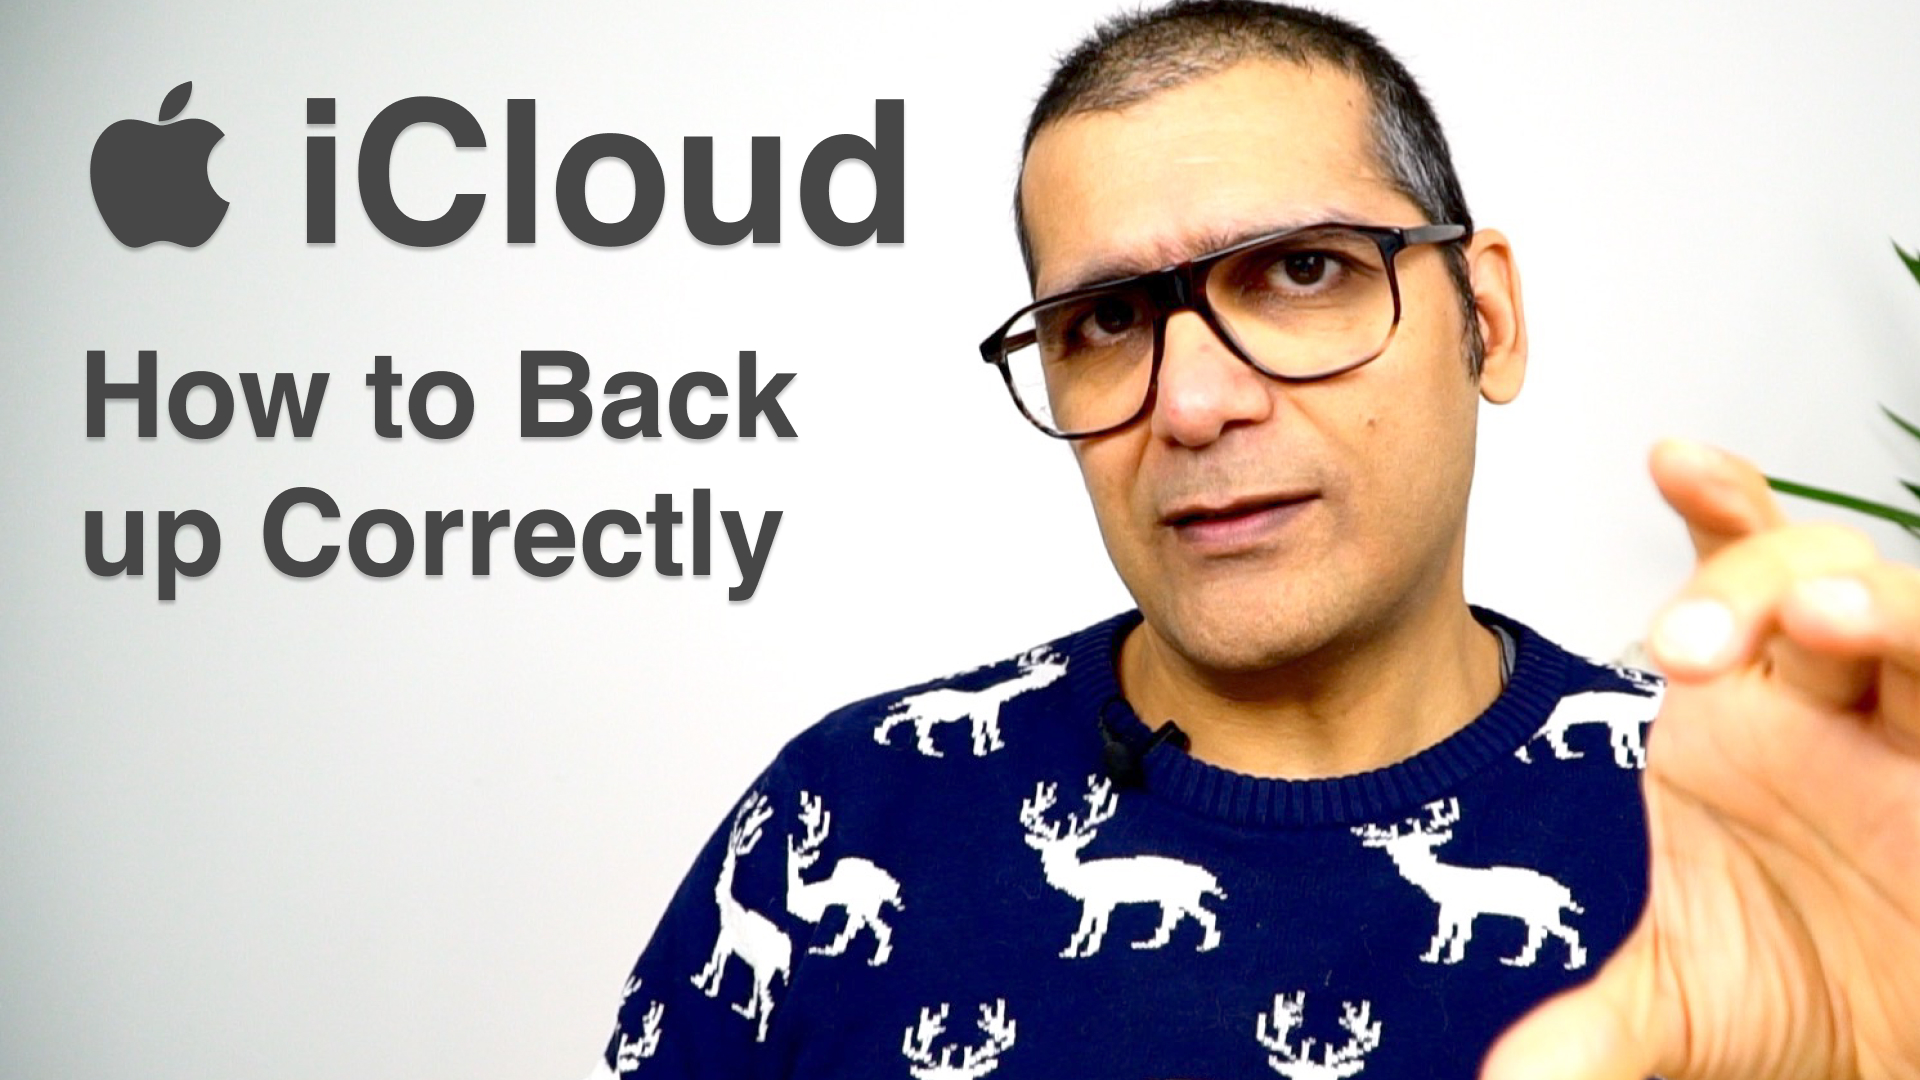 iCloud and how to backup your data properly